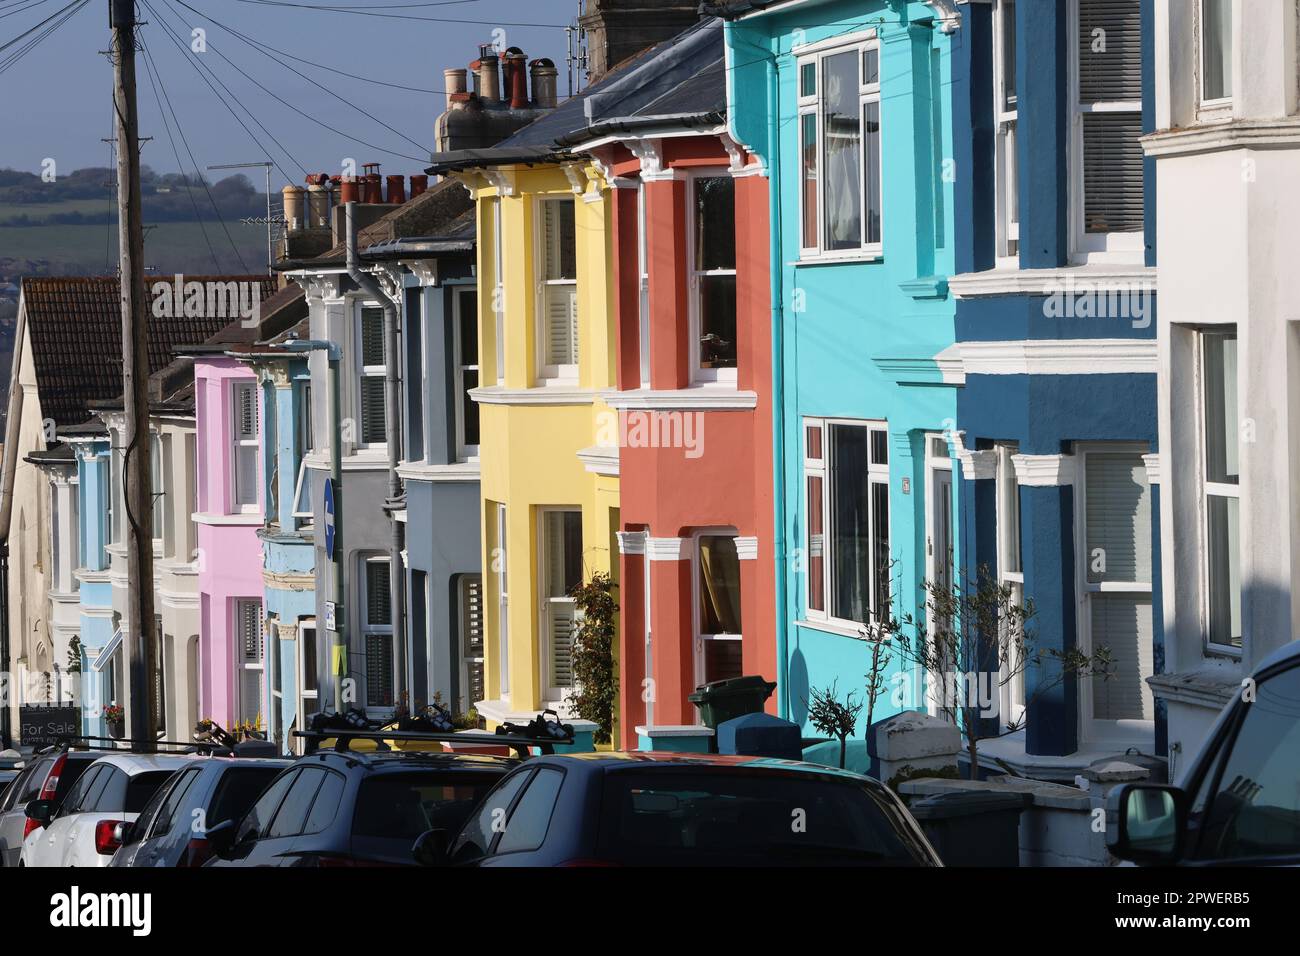 A terrace of brightly painted houses in Brighton, UK Stock Photo